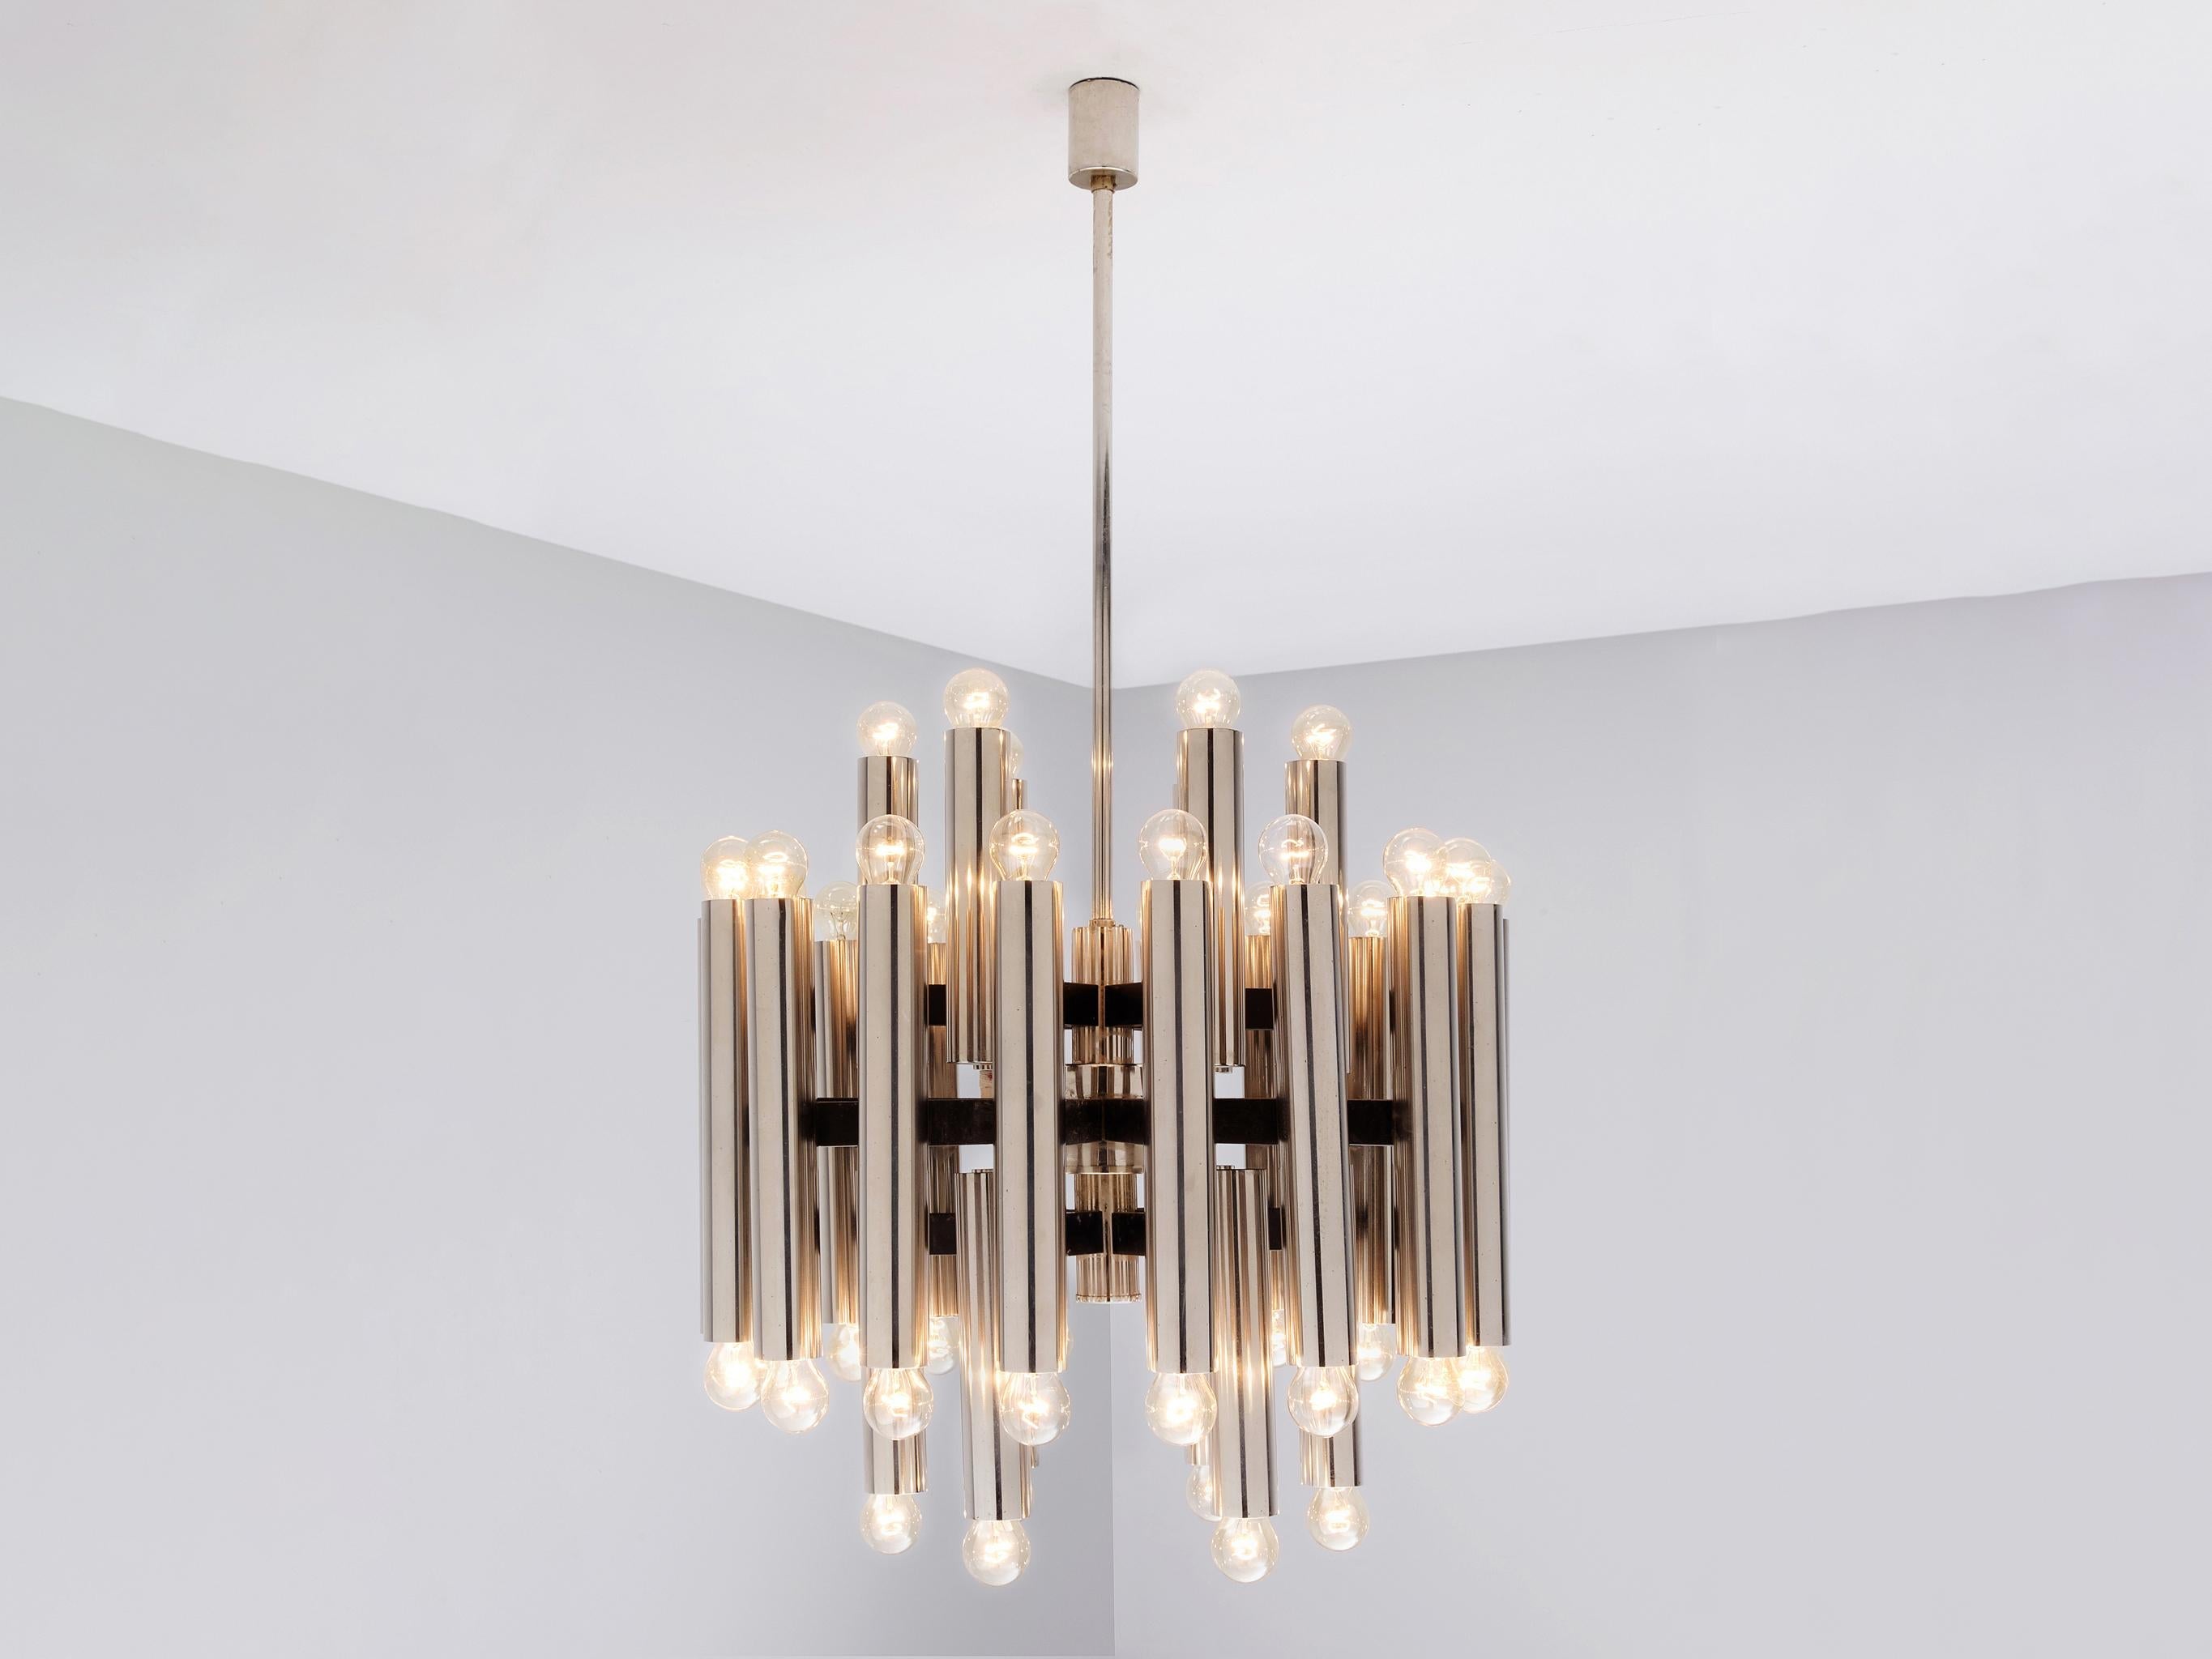 Large German Chandelier in Chrome-Plated Steel